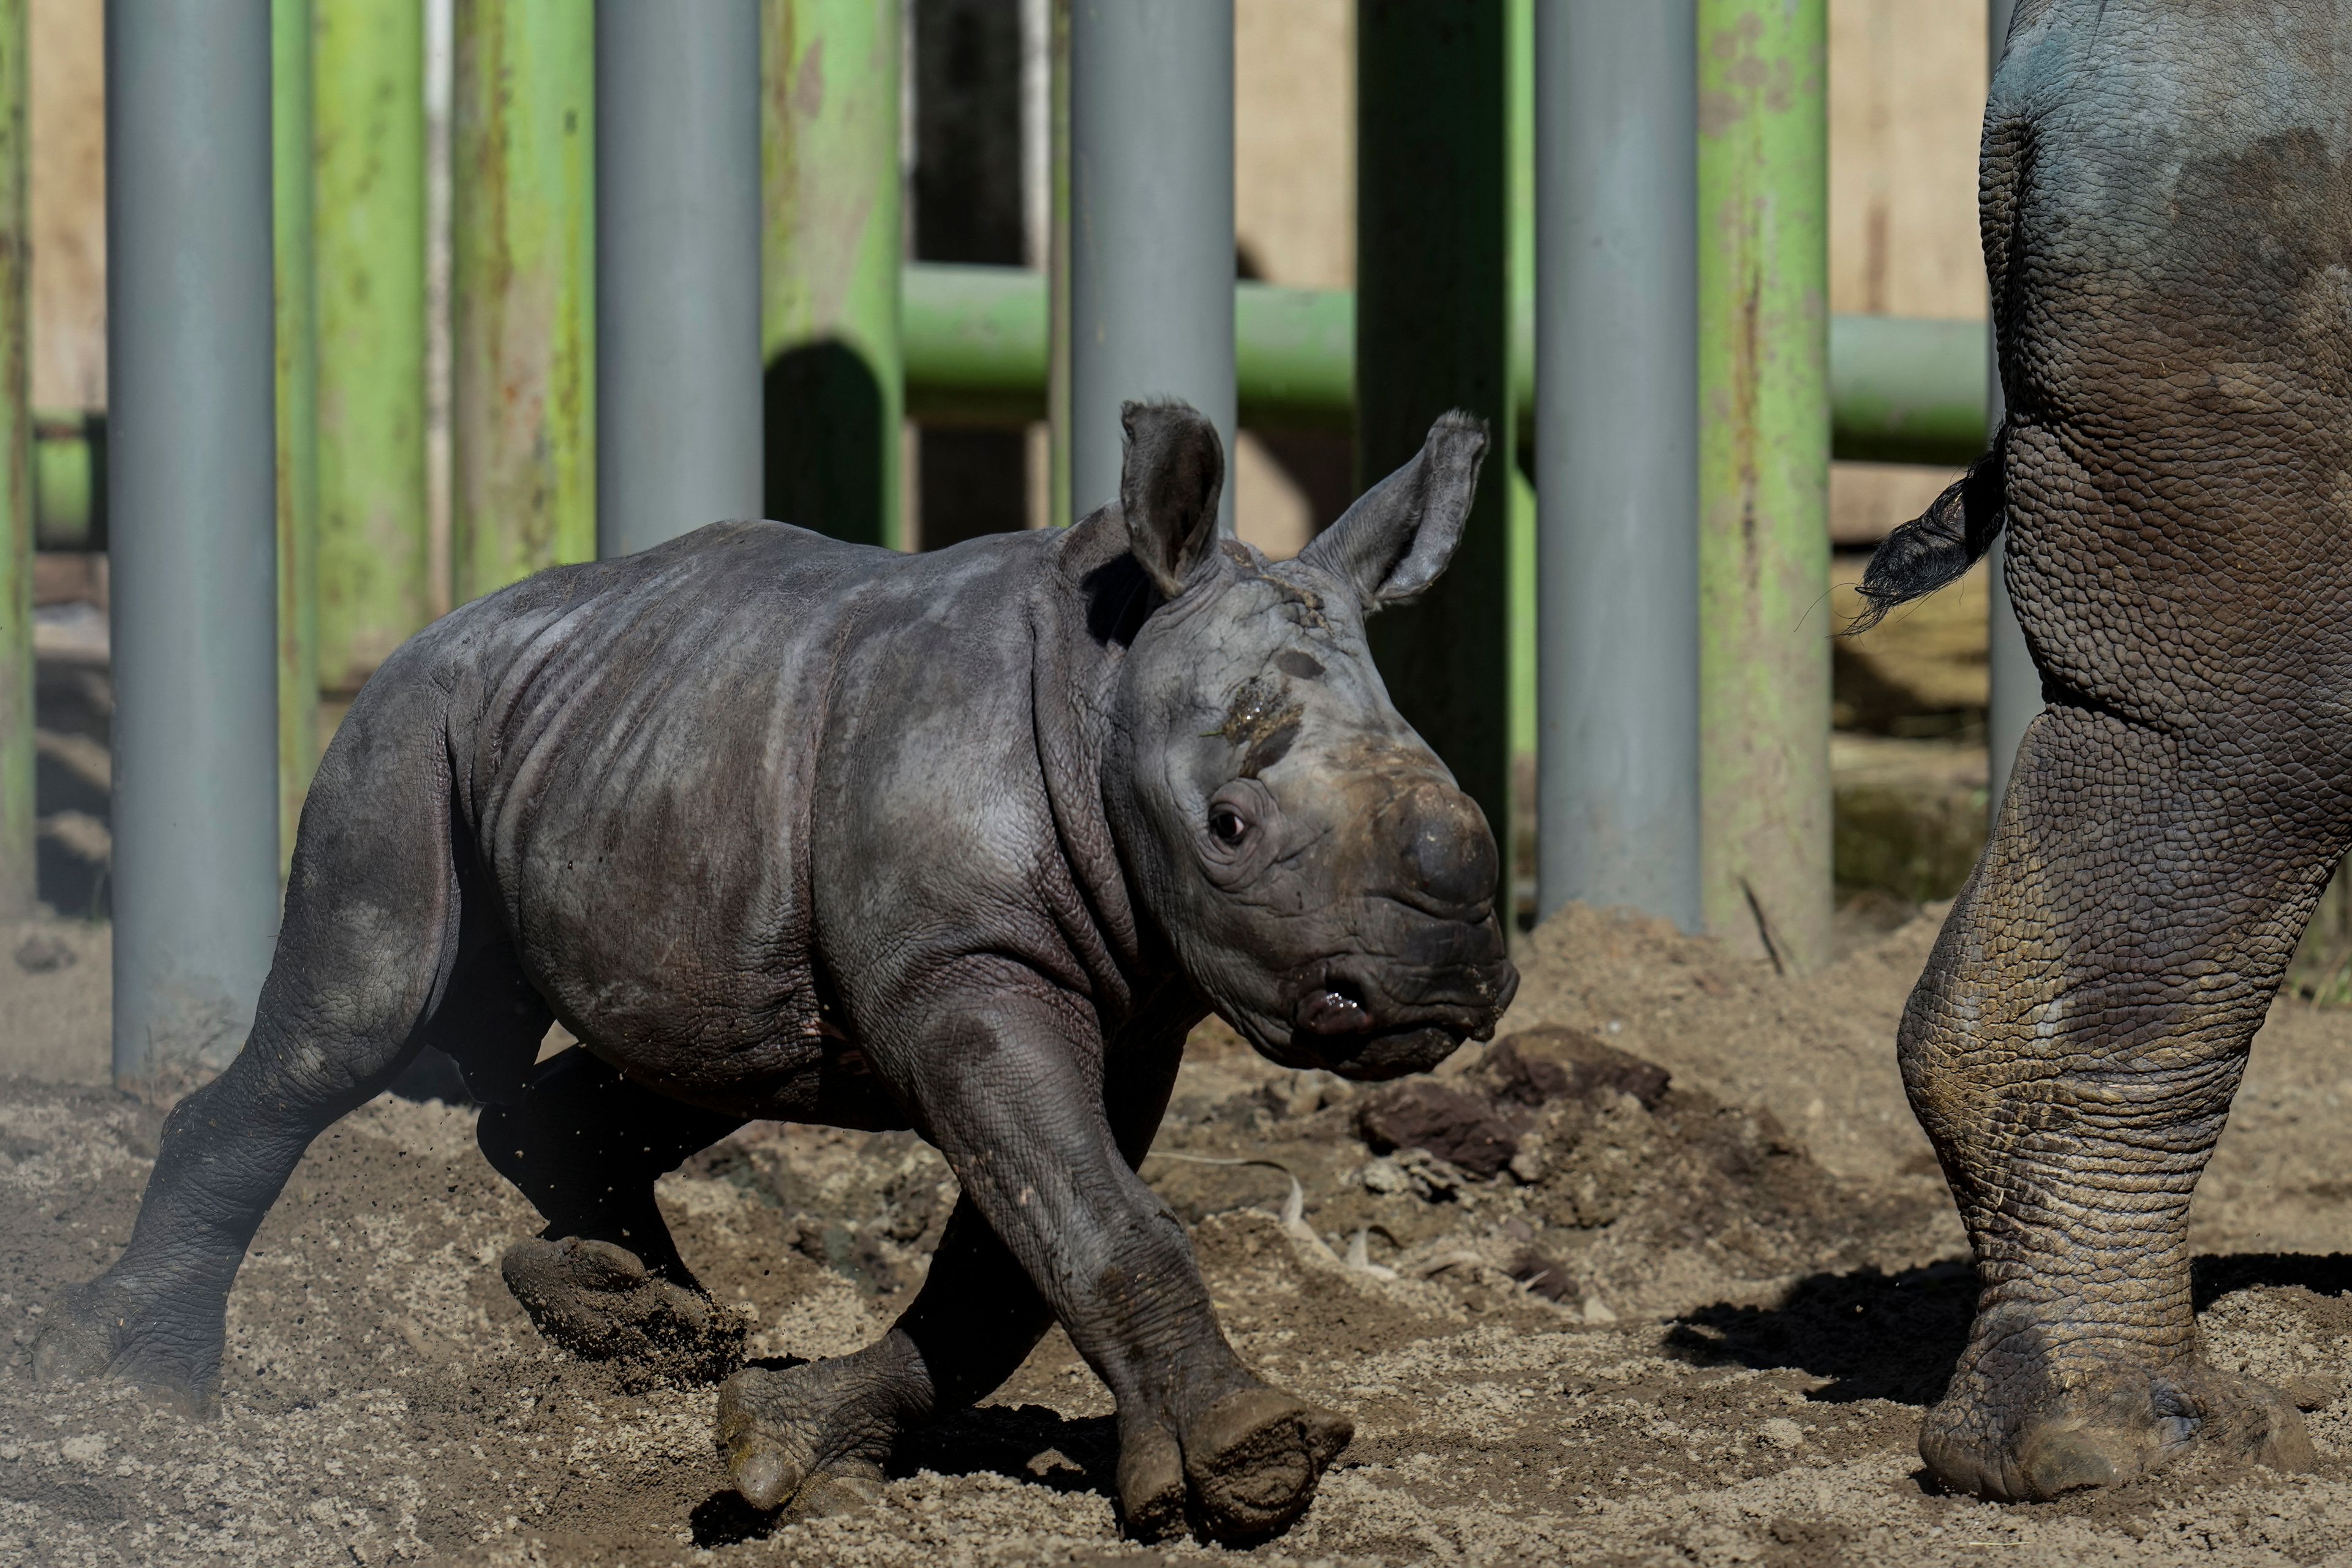 Newborn white rhino Silverio takes his giant first steps in a Chilean zoo in a boost to his species